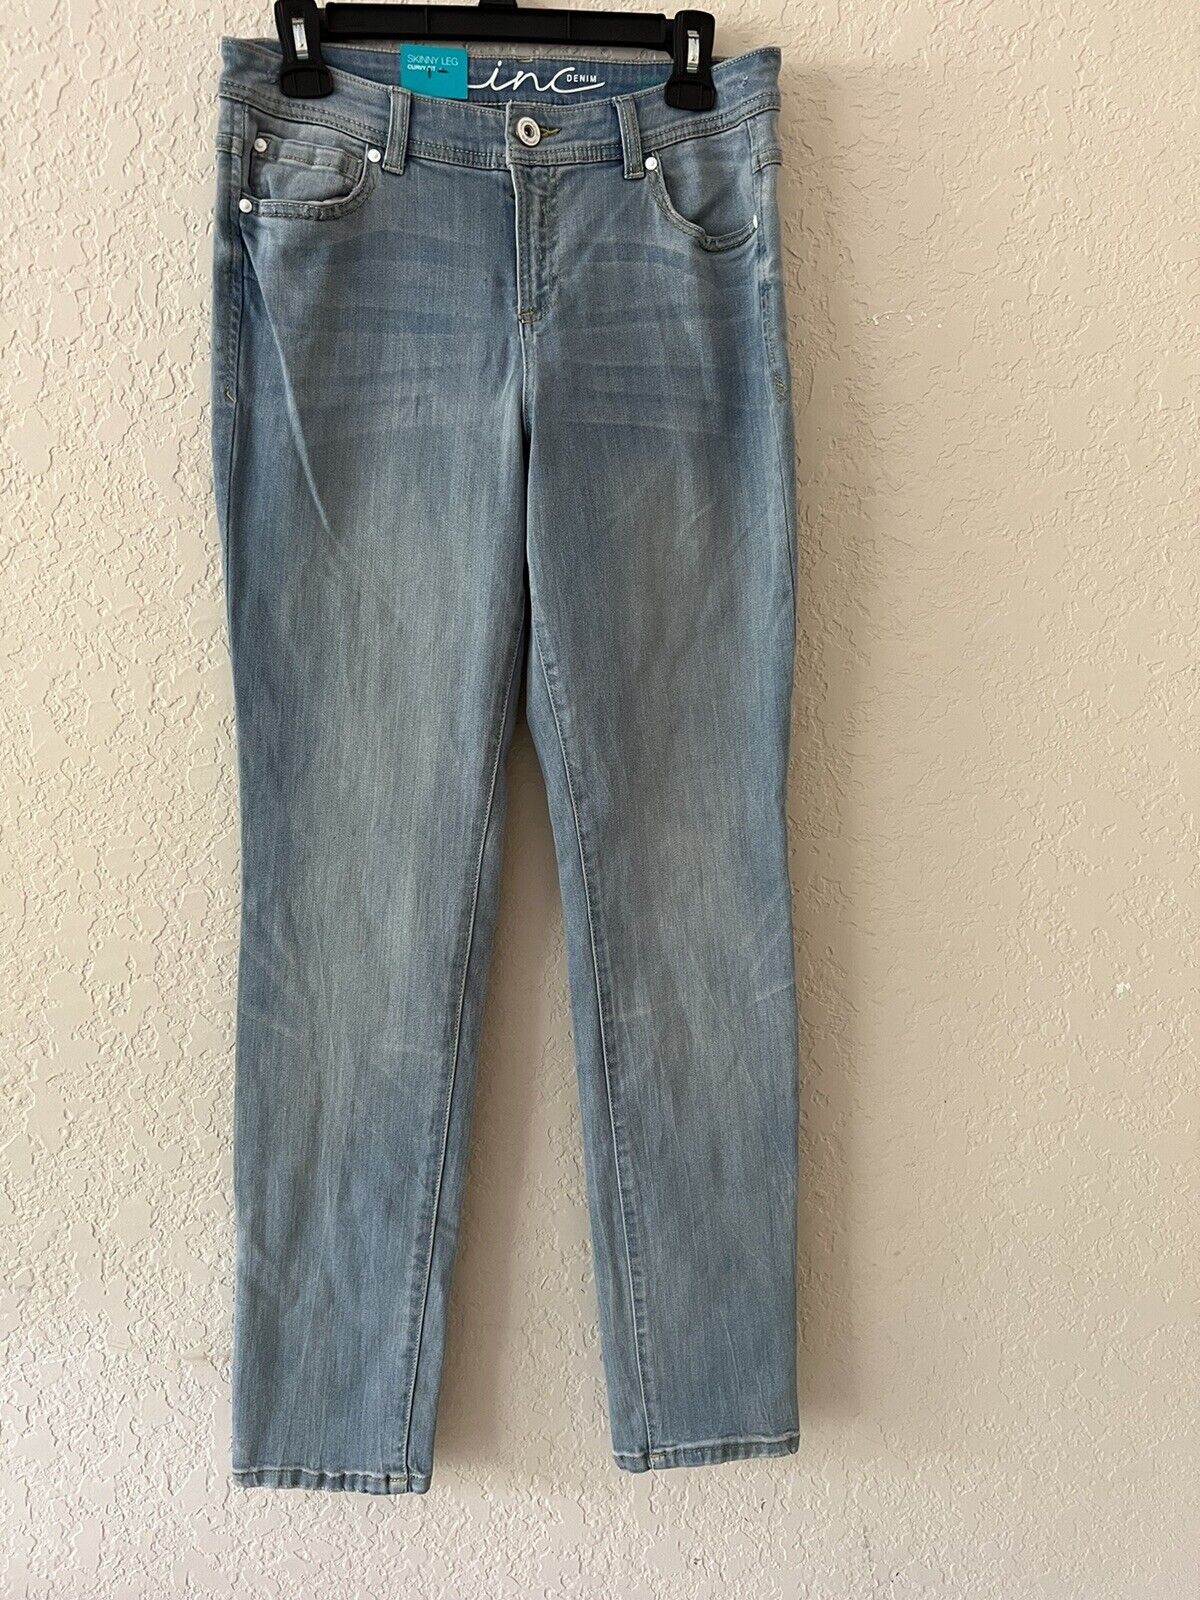 inc skinny legs curry fit jeans light blue size 6